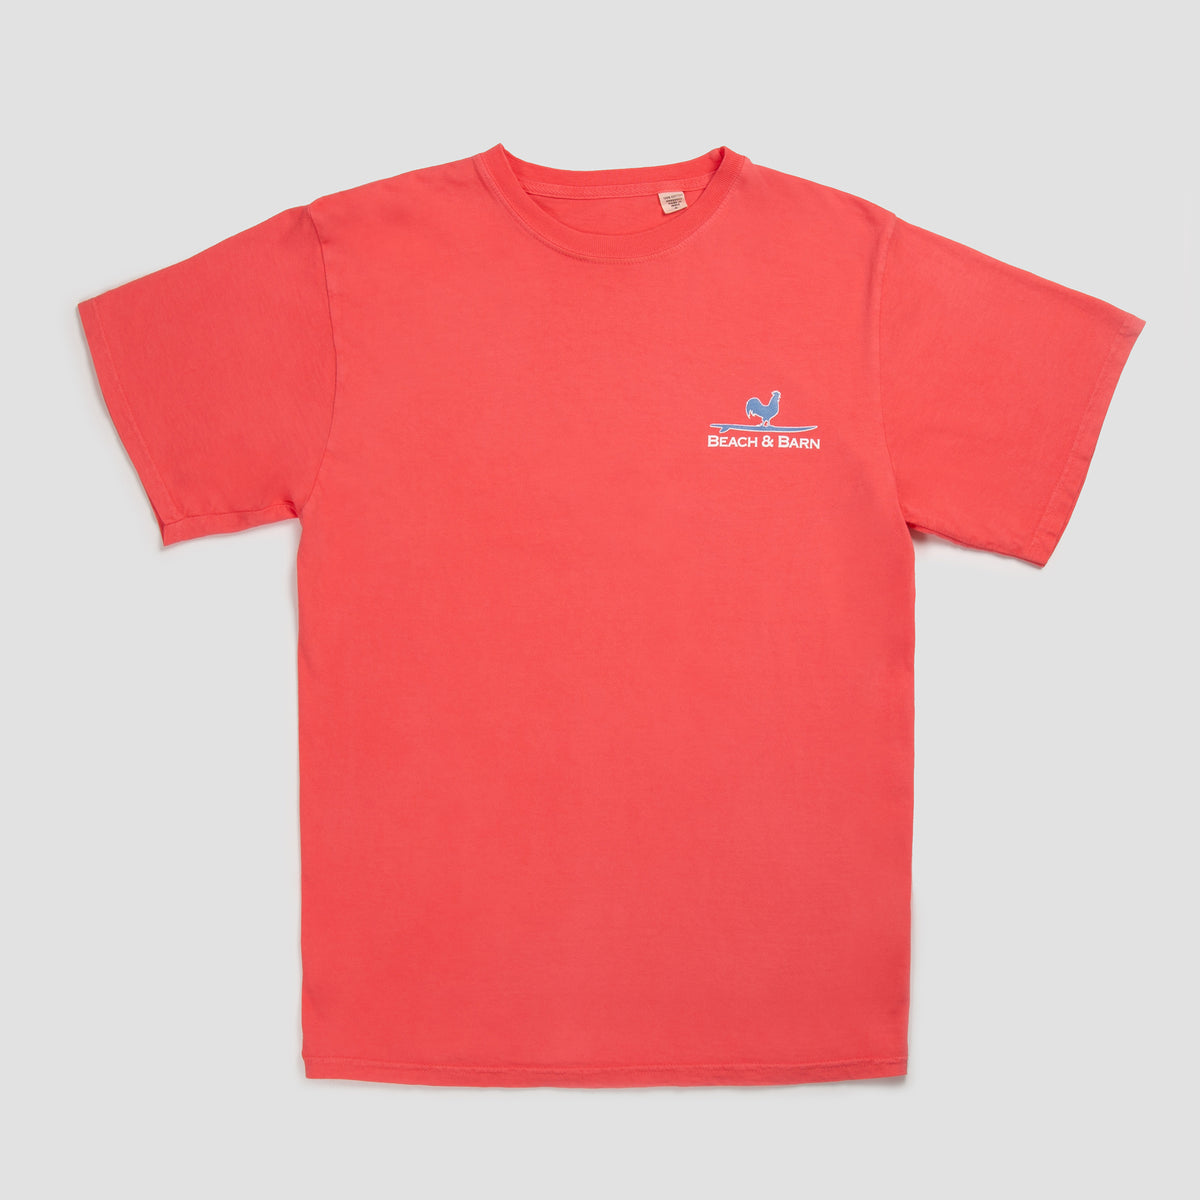 Sale - Surfing Rooster Tee Shirt